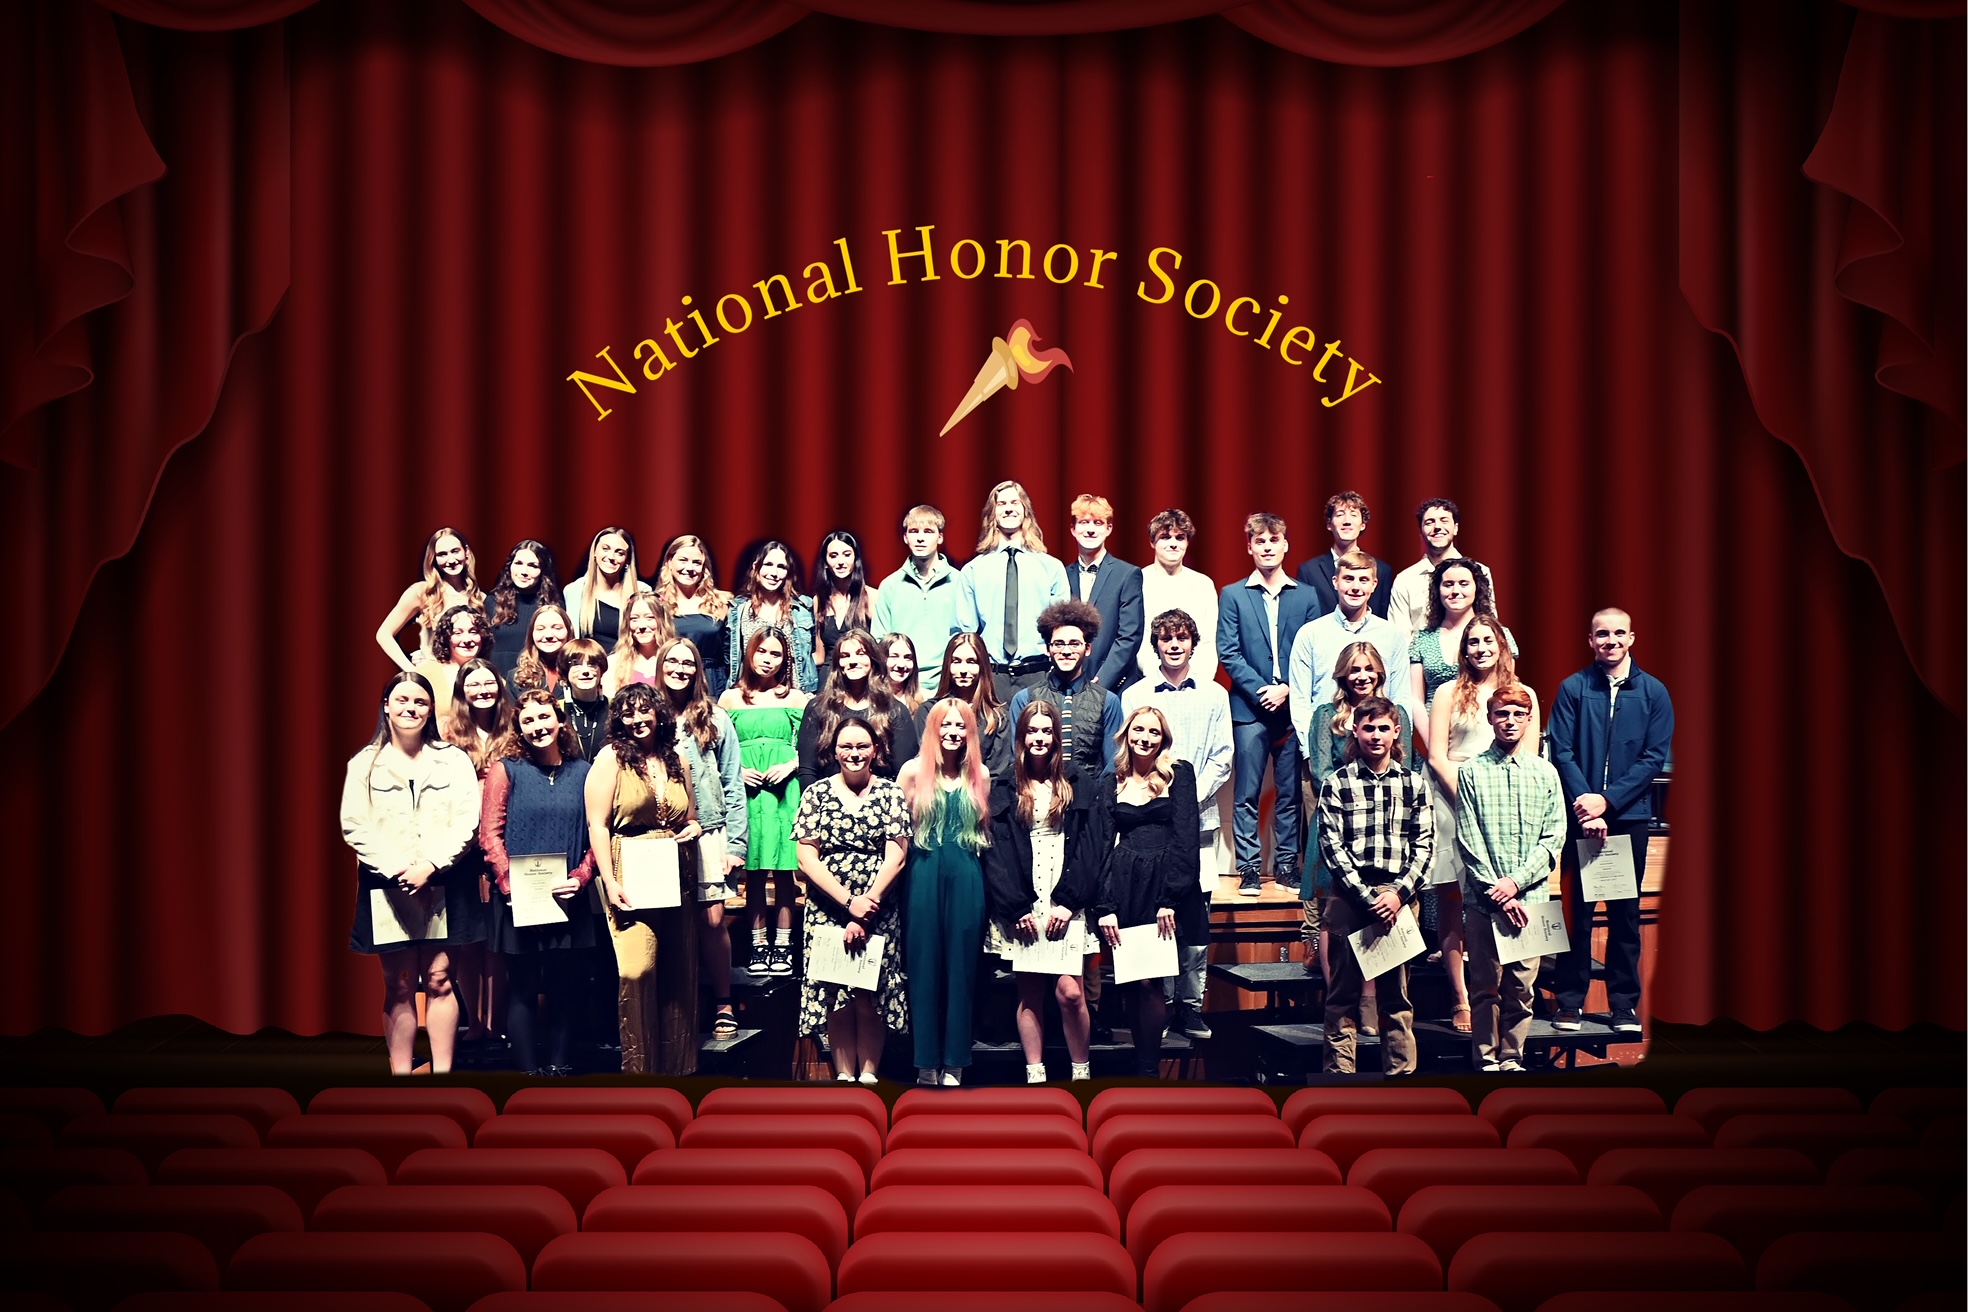 three rows of students stand in front of a stage curtain with the National Honor Society logo above them